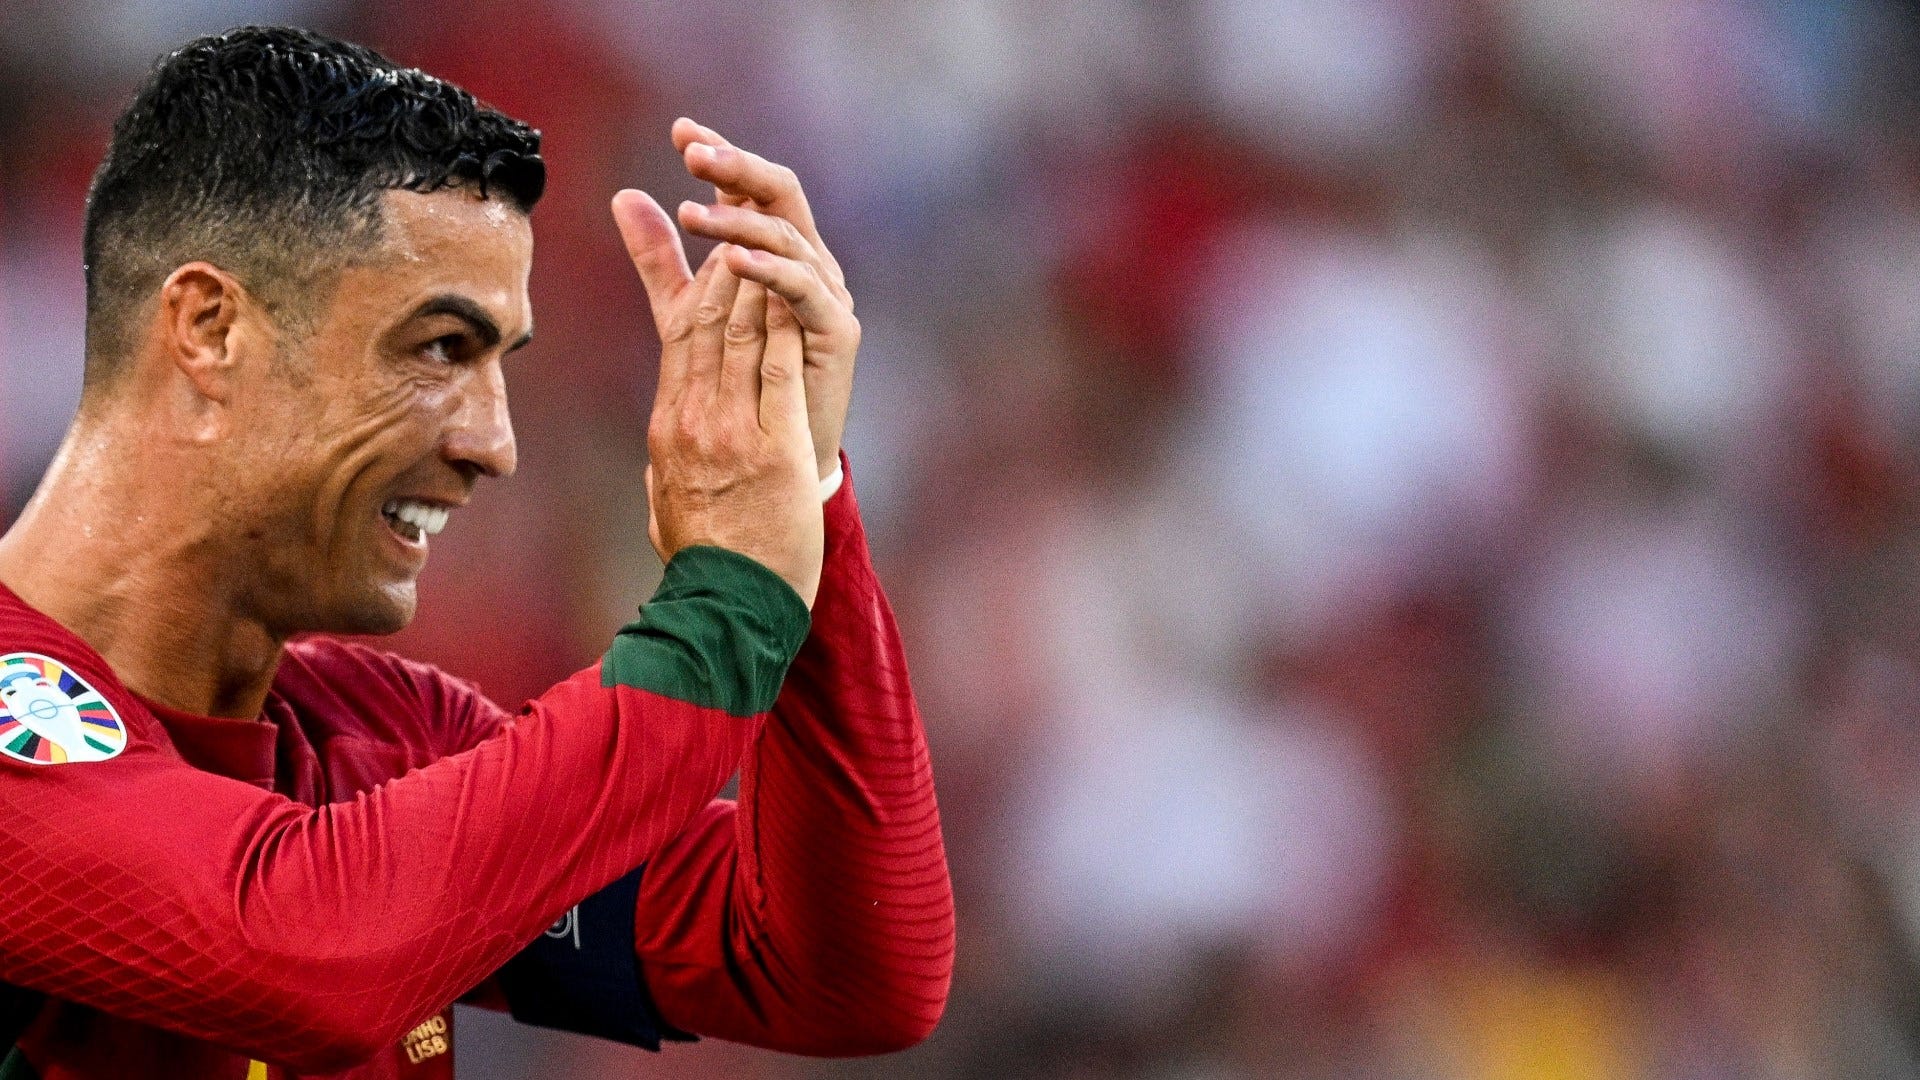 Cristiano Ronaldo returns to Al-Nassr early after Portugal suspension - S-News